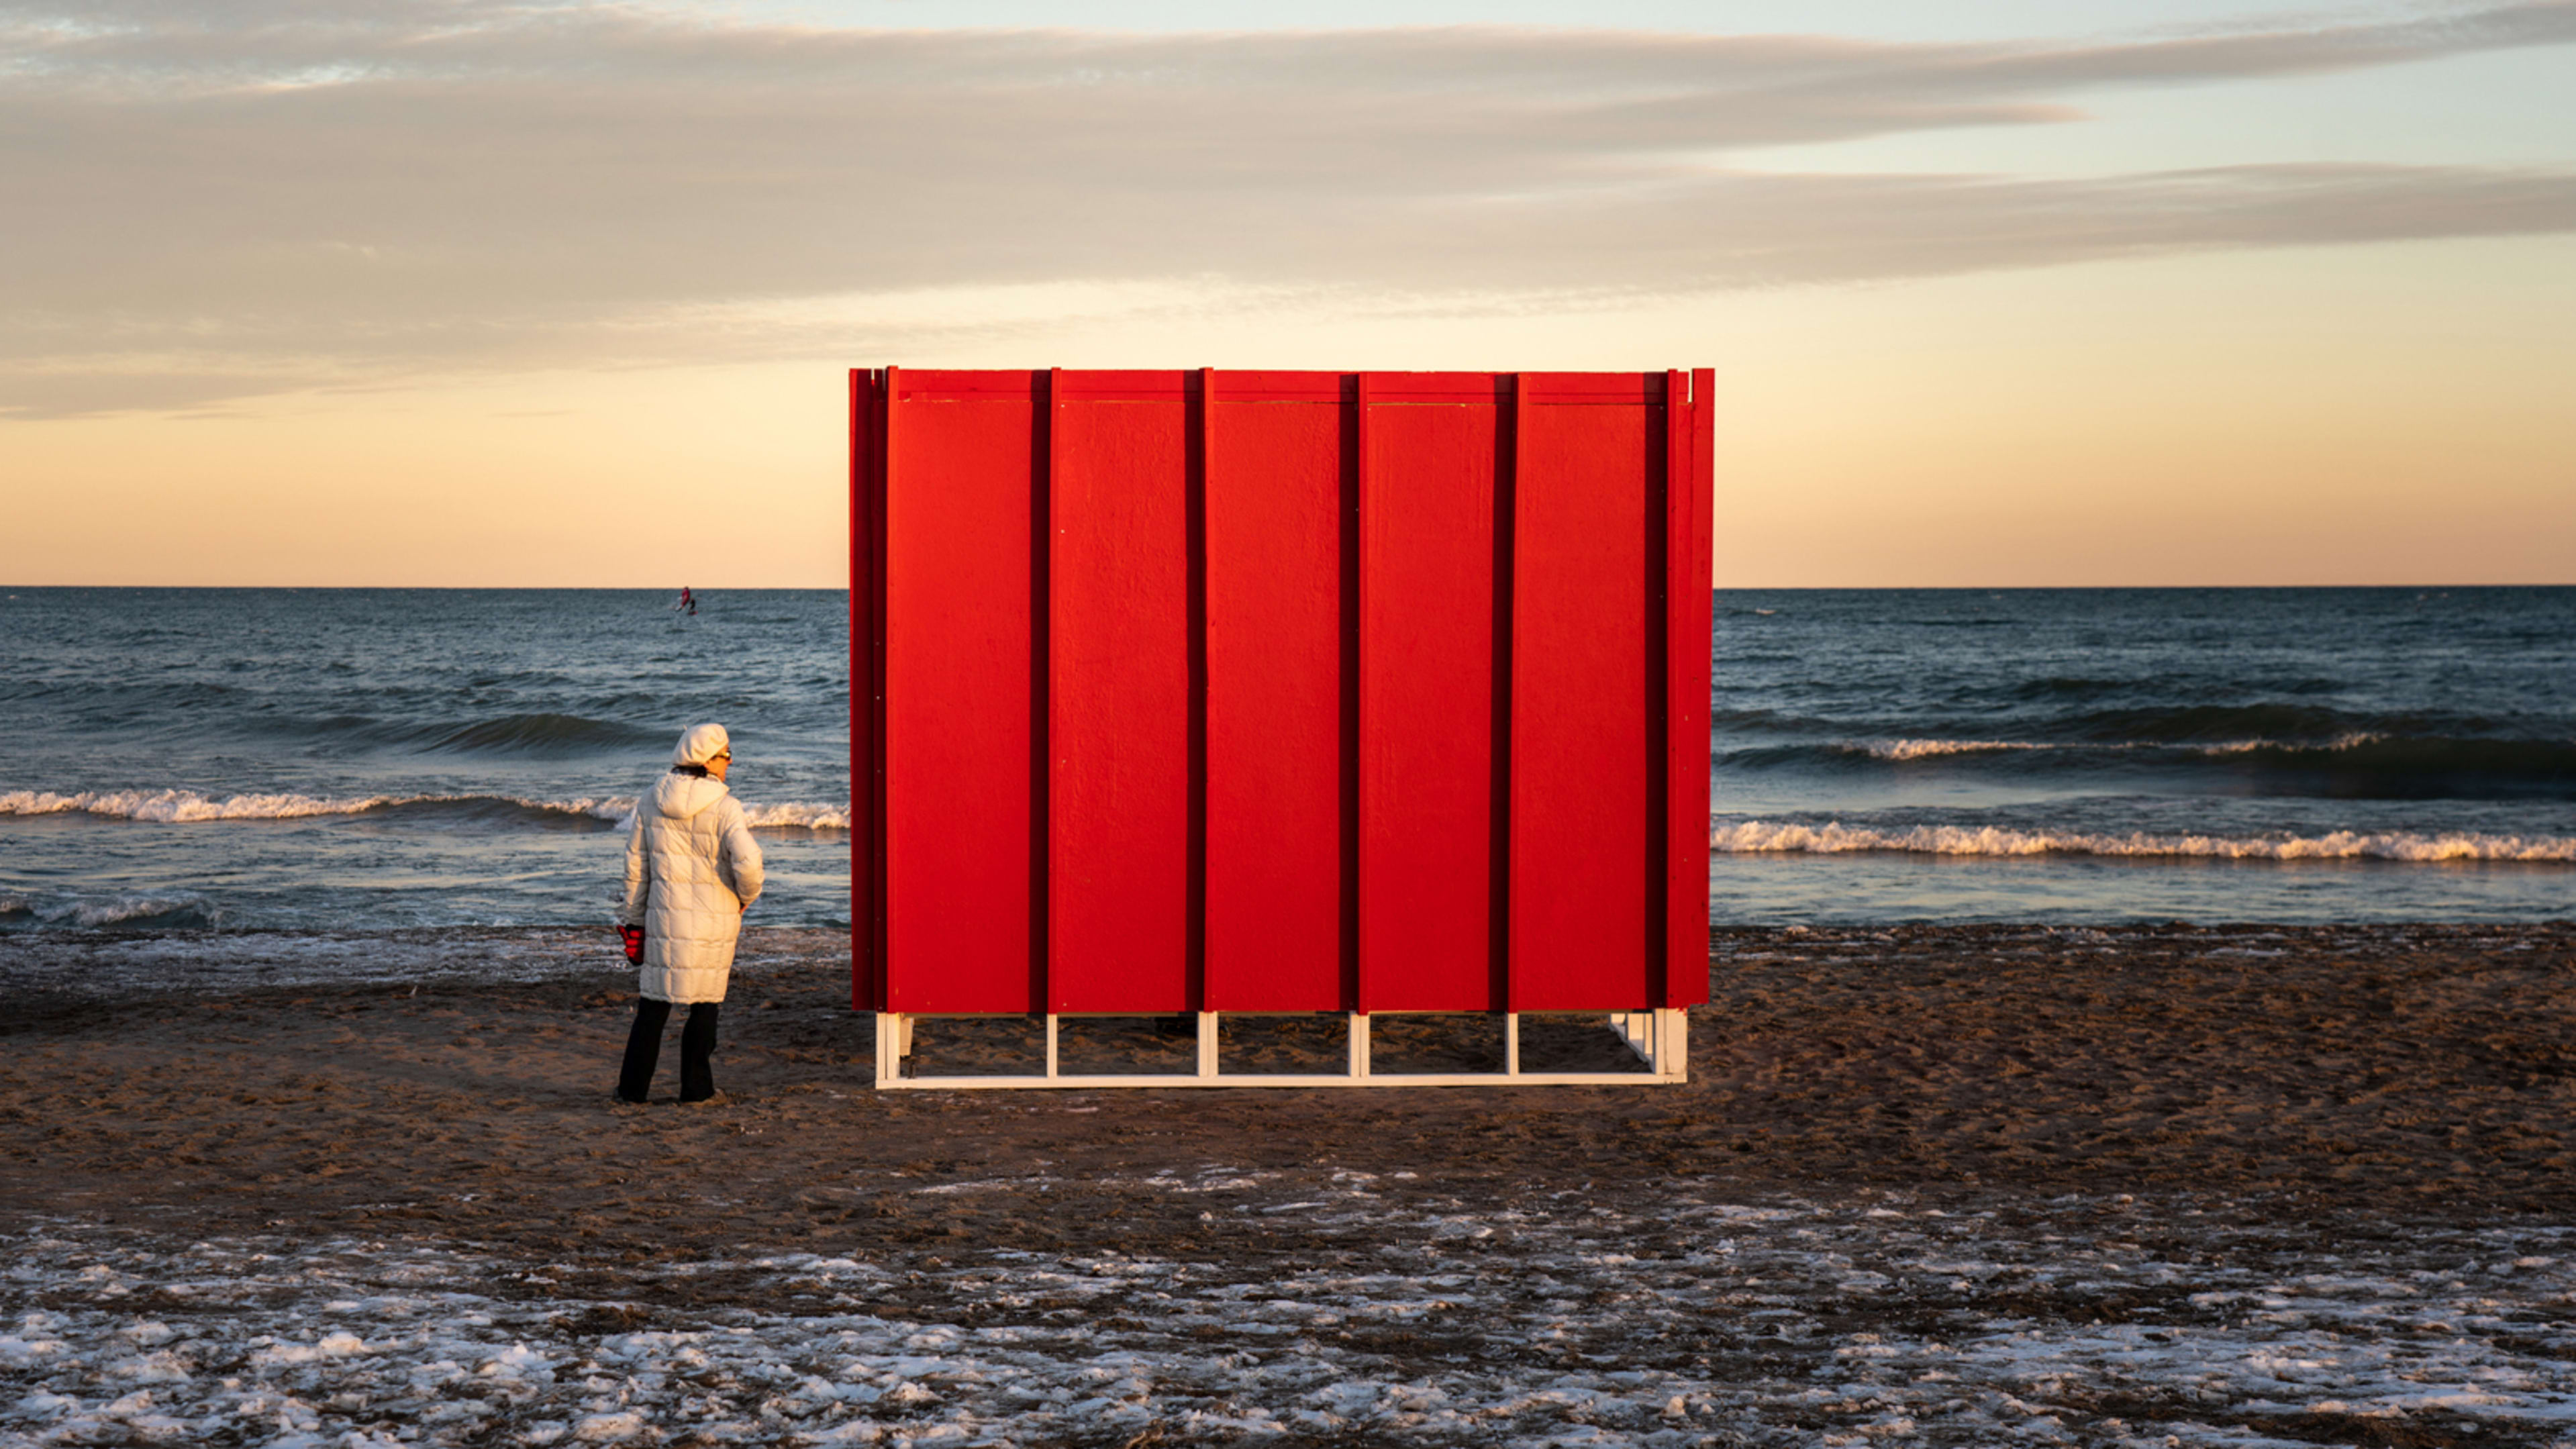 These far-out pavilions make going to a frigid Canadian beach worthwhile